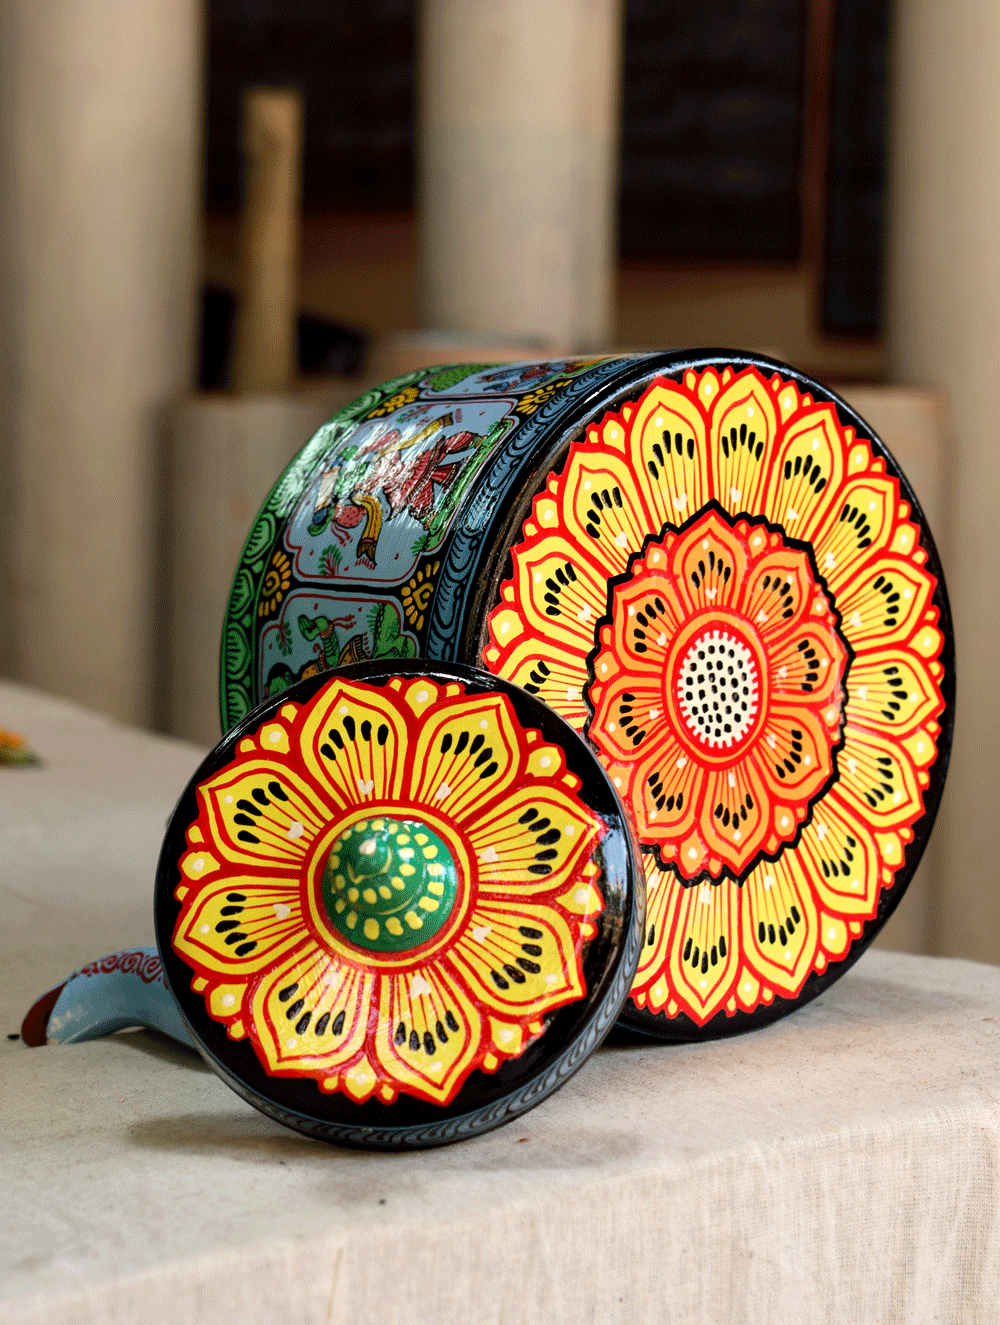 Load image into Gallery viewer, Pattachitra Art - Tin Teapot, Large - The India Craft House 